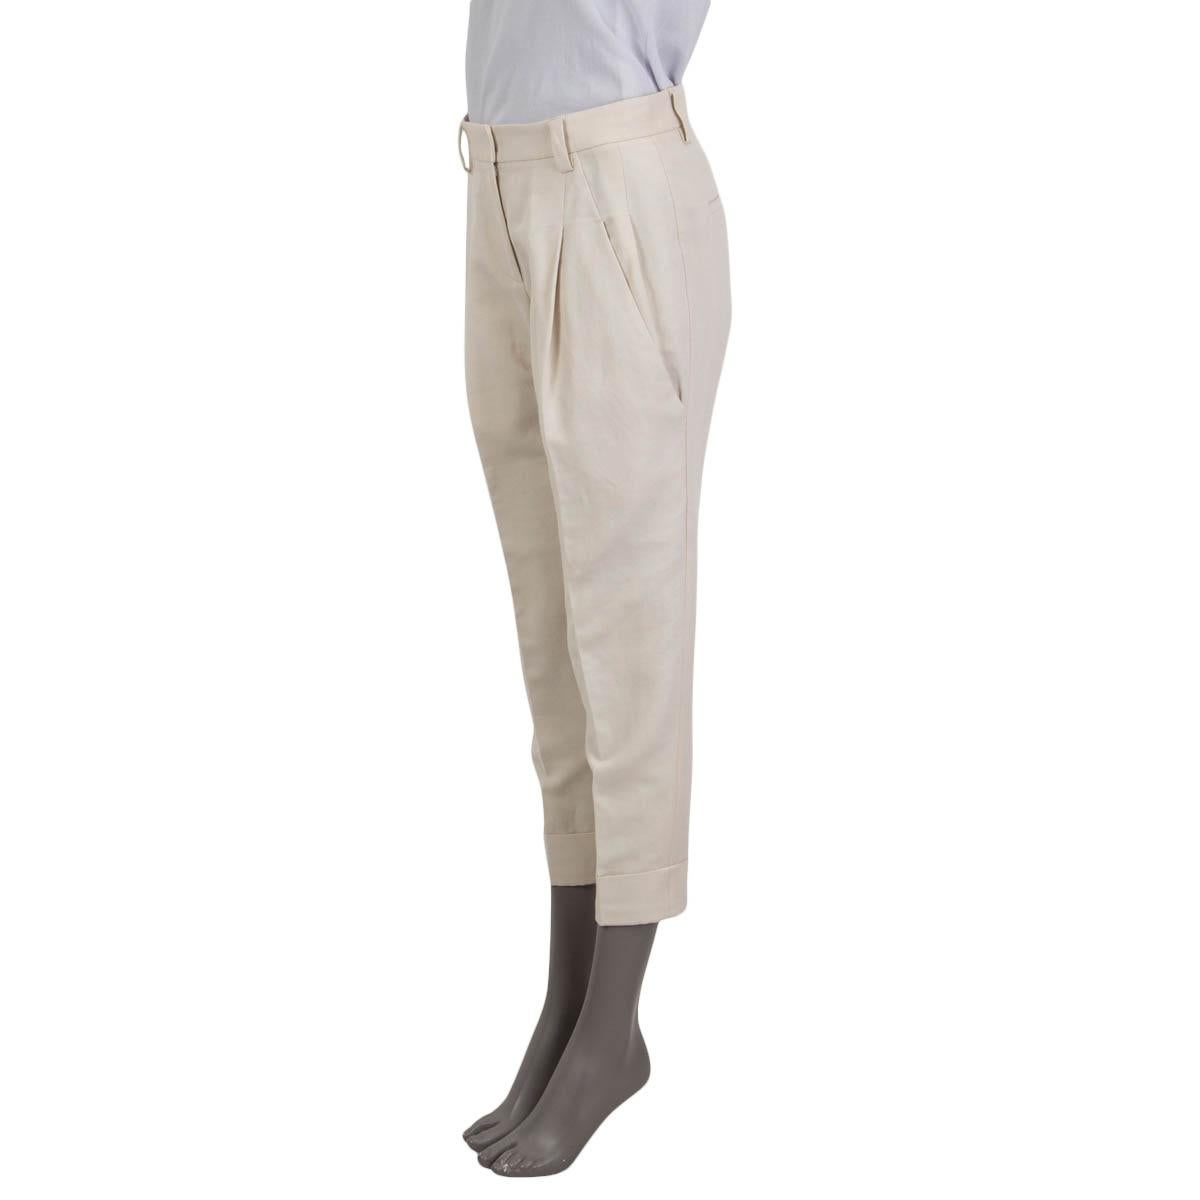 100% authentic Brunello Cucinelli pleated pants in ivory cotton and (72%) and linen (28%). The design has two slit pockets on the side and on the pack and turn-ups on the bottom. Has been worn and are in excellent condition. 

Measurements
Tag